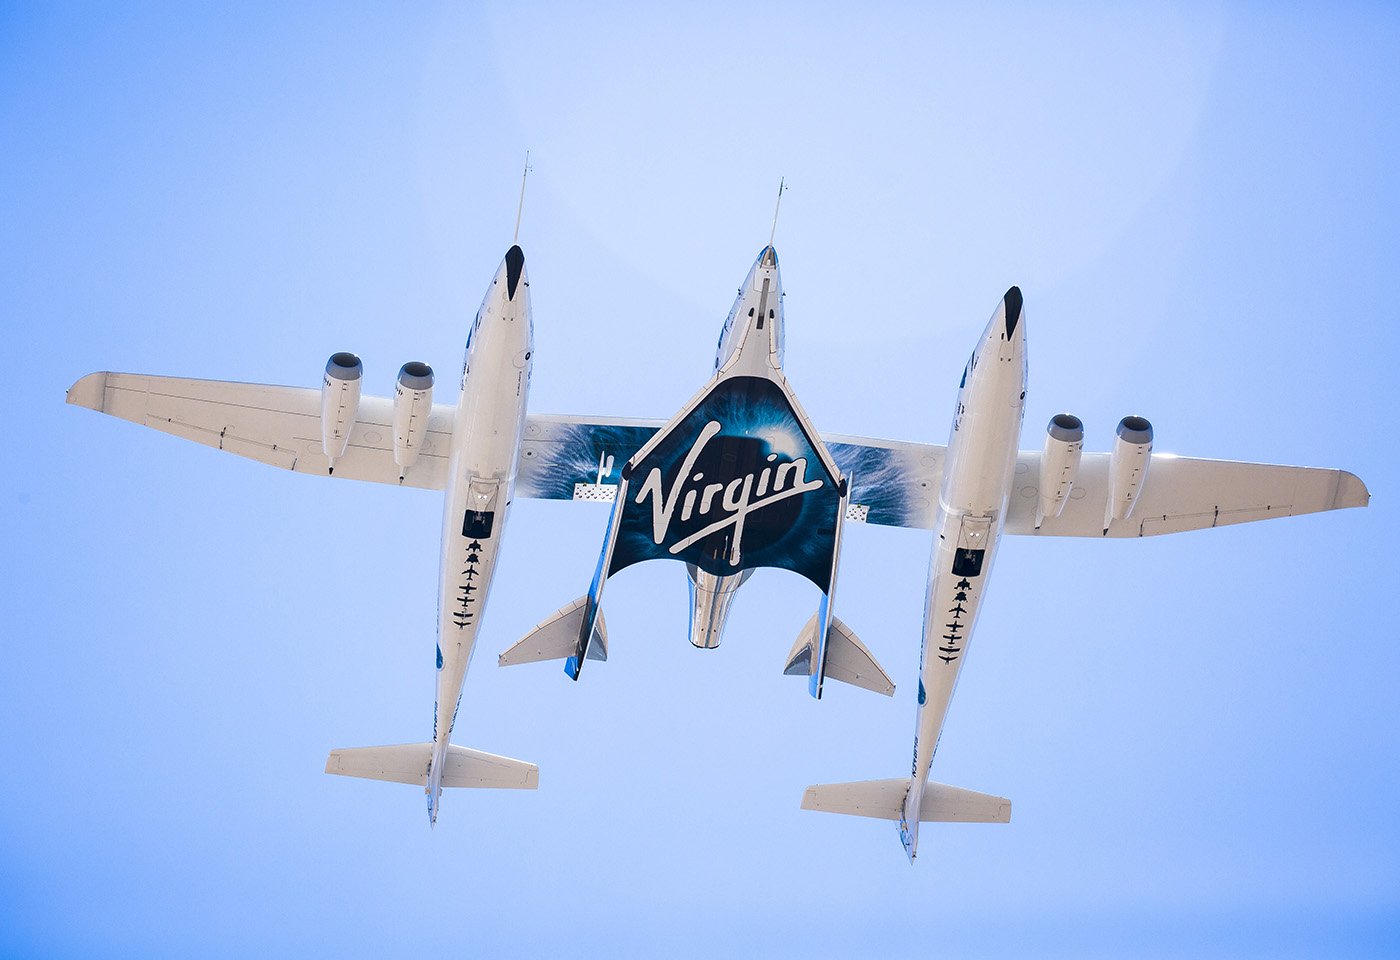 Shifting from scientific operations to a world-class experience, Virgin Galactic is creating the best possible journey for their future astronauts.